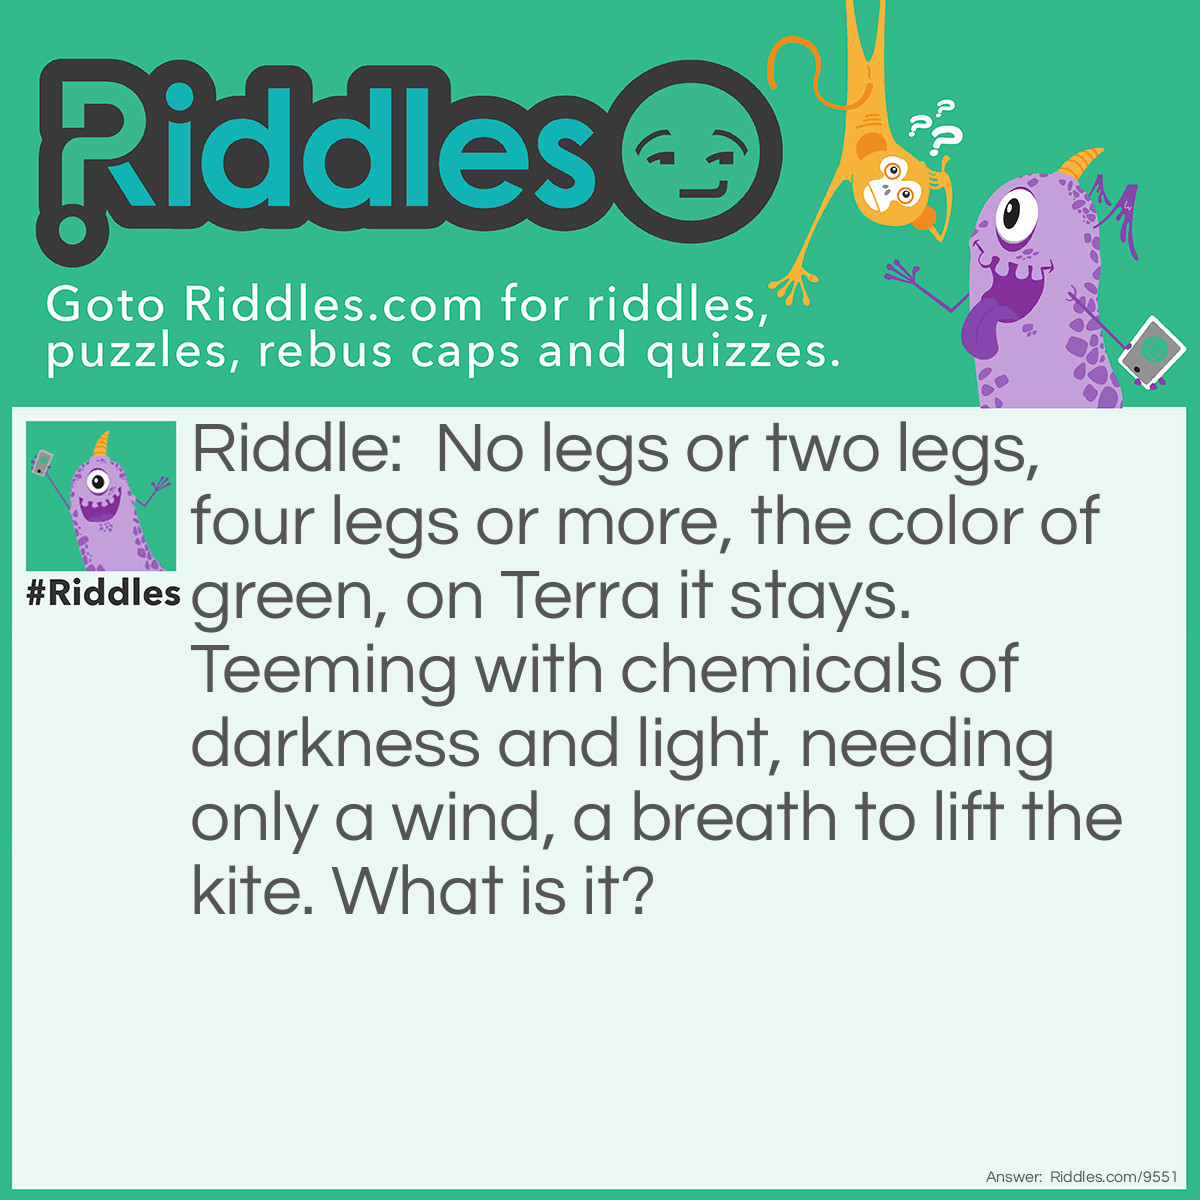 Riddle: No legs or two legs, four legs or more, the color of green, on Terra it stays. Teeming with chemicals of darkness and light, needing only a wind, a breath to lift the kite. What is it? Answer: Life.